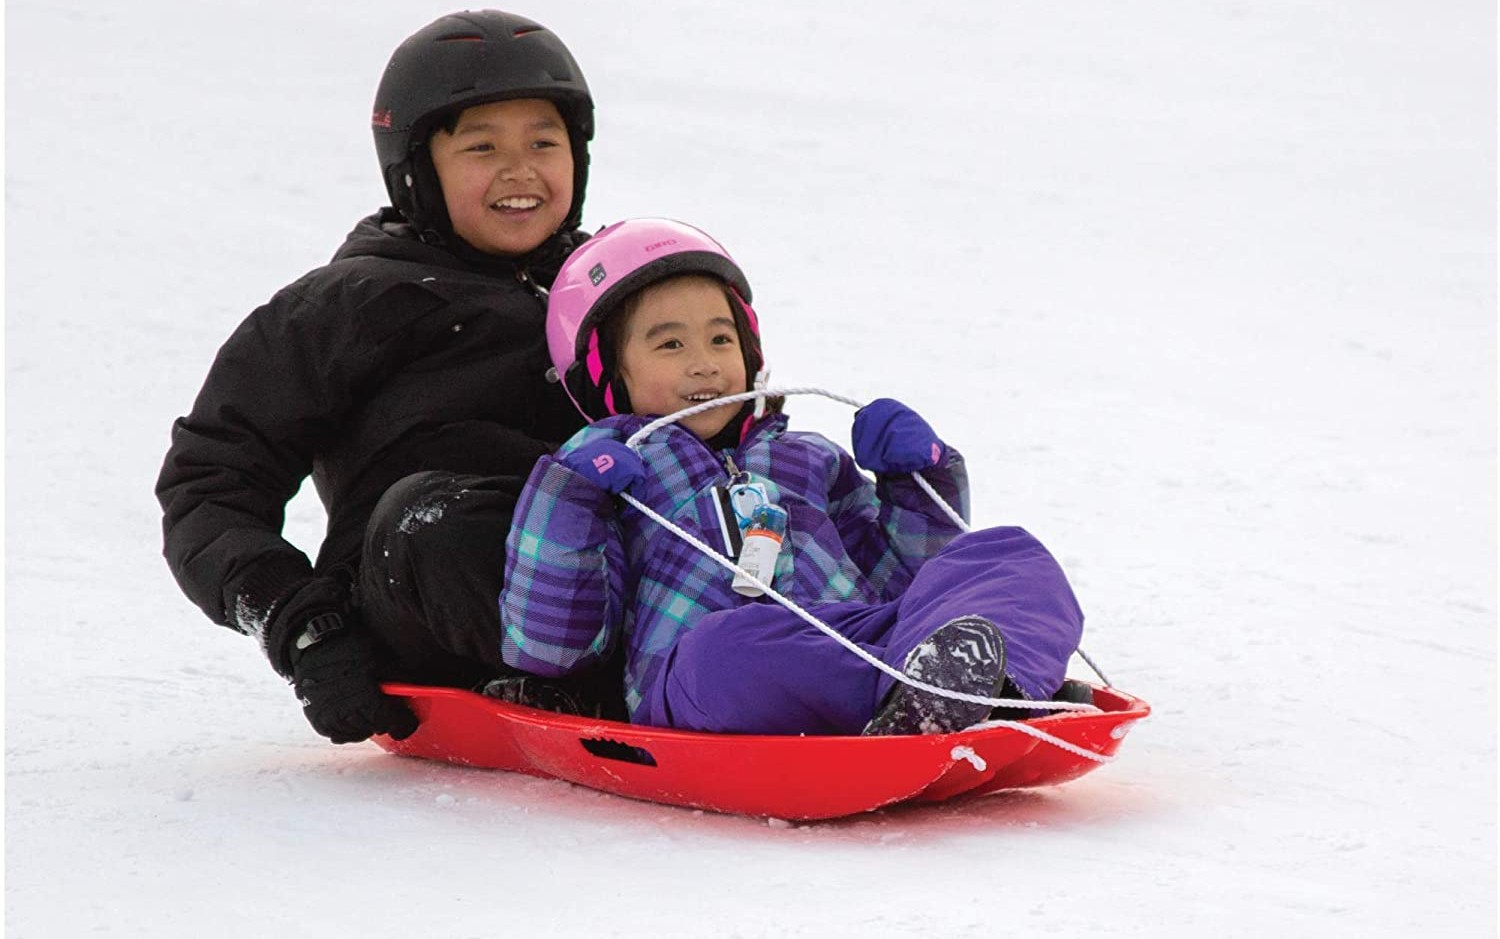 Two kids in snow gear riding together on snow in the best snow sled option.